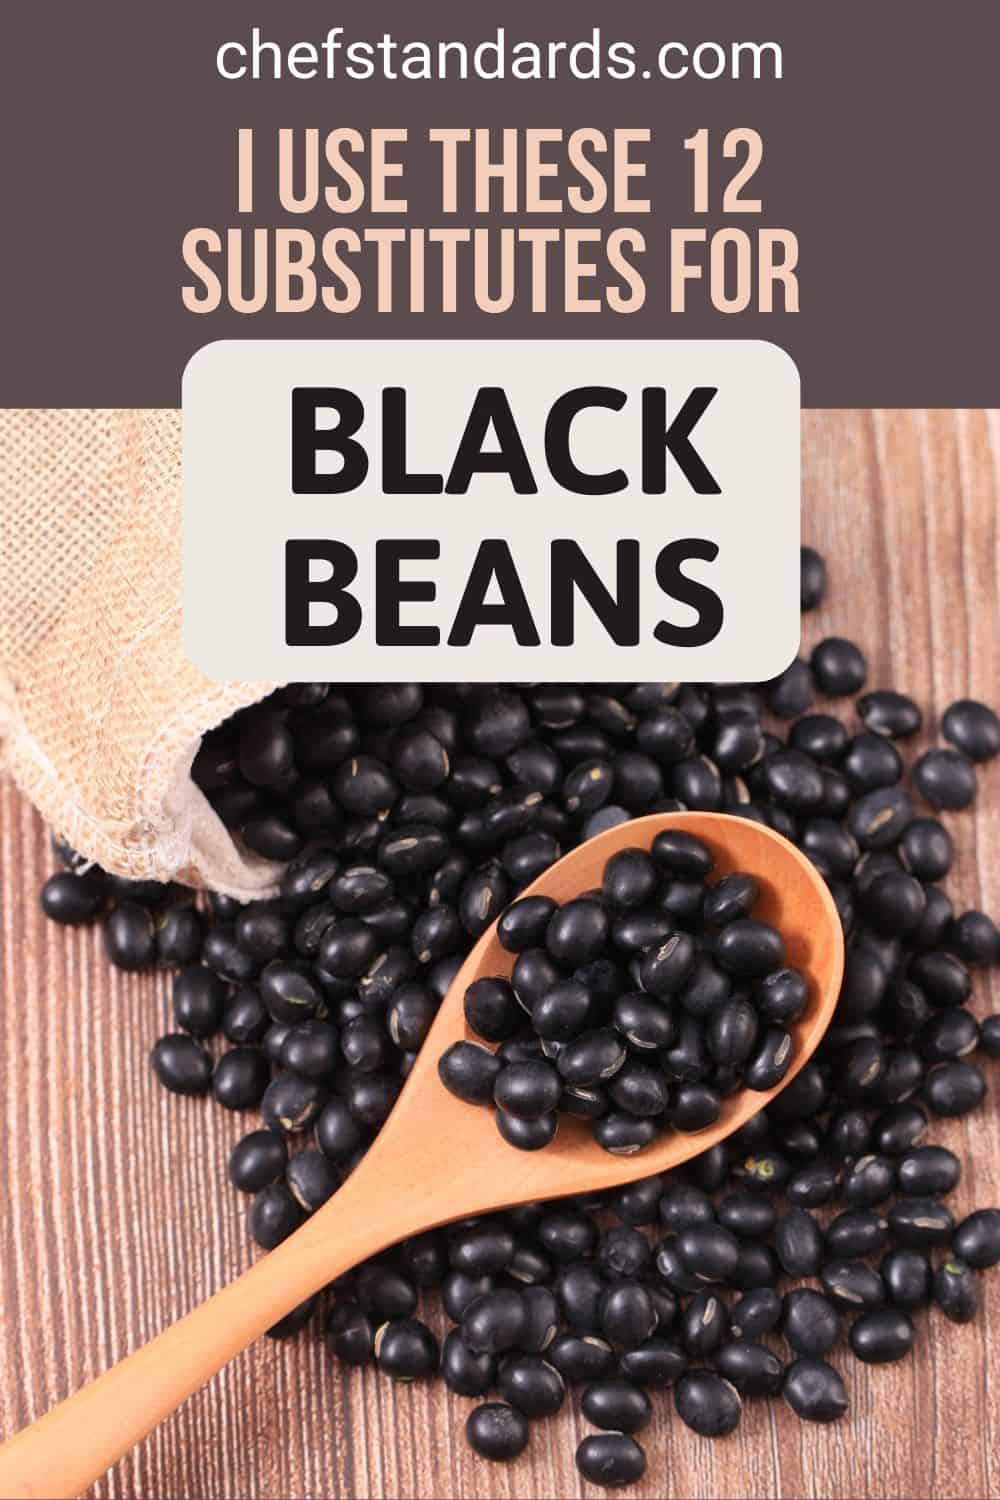 12 Amazing Substitutes For Black Beans That Work Perfectly